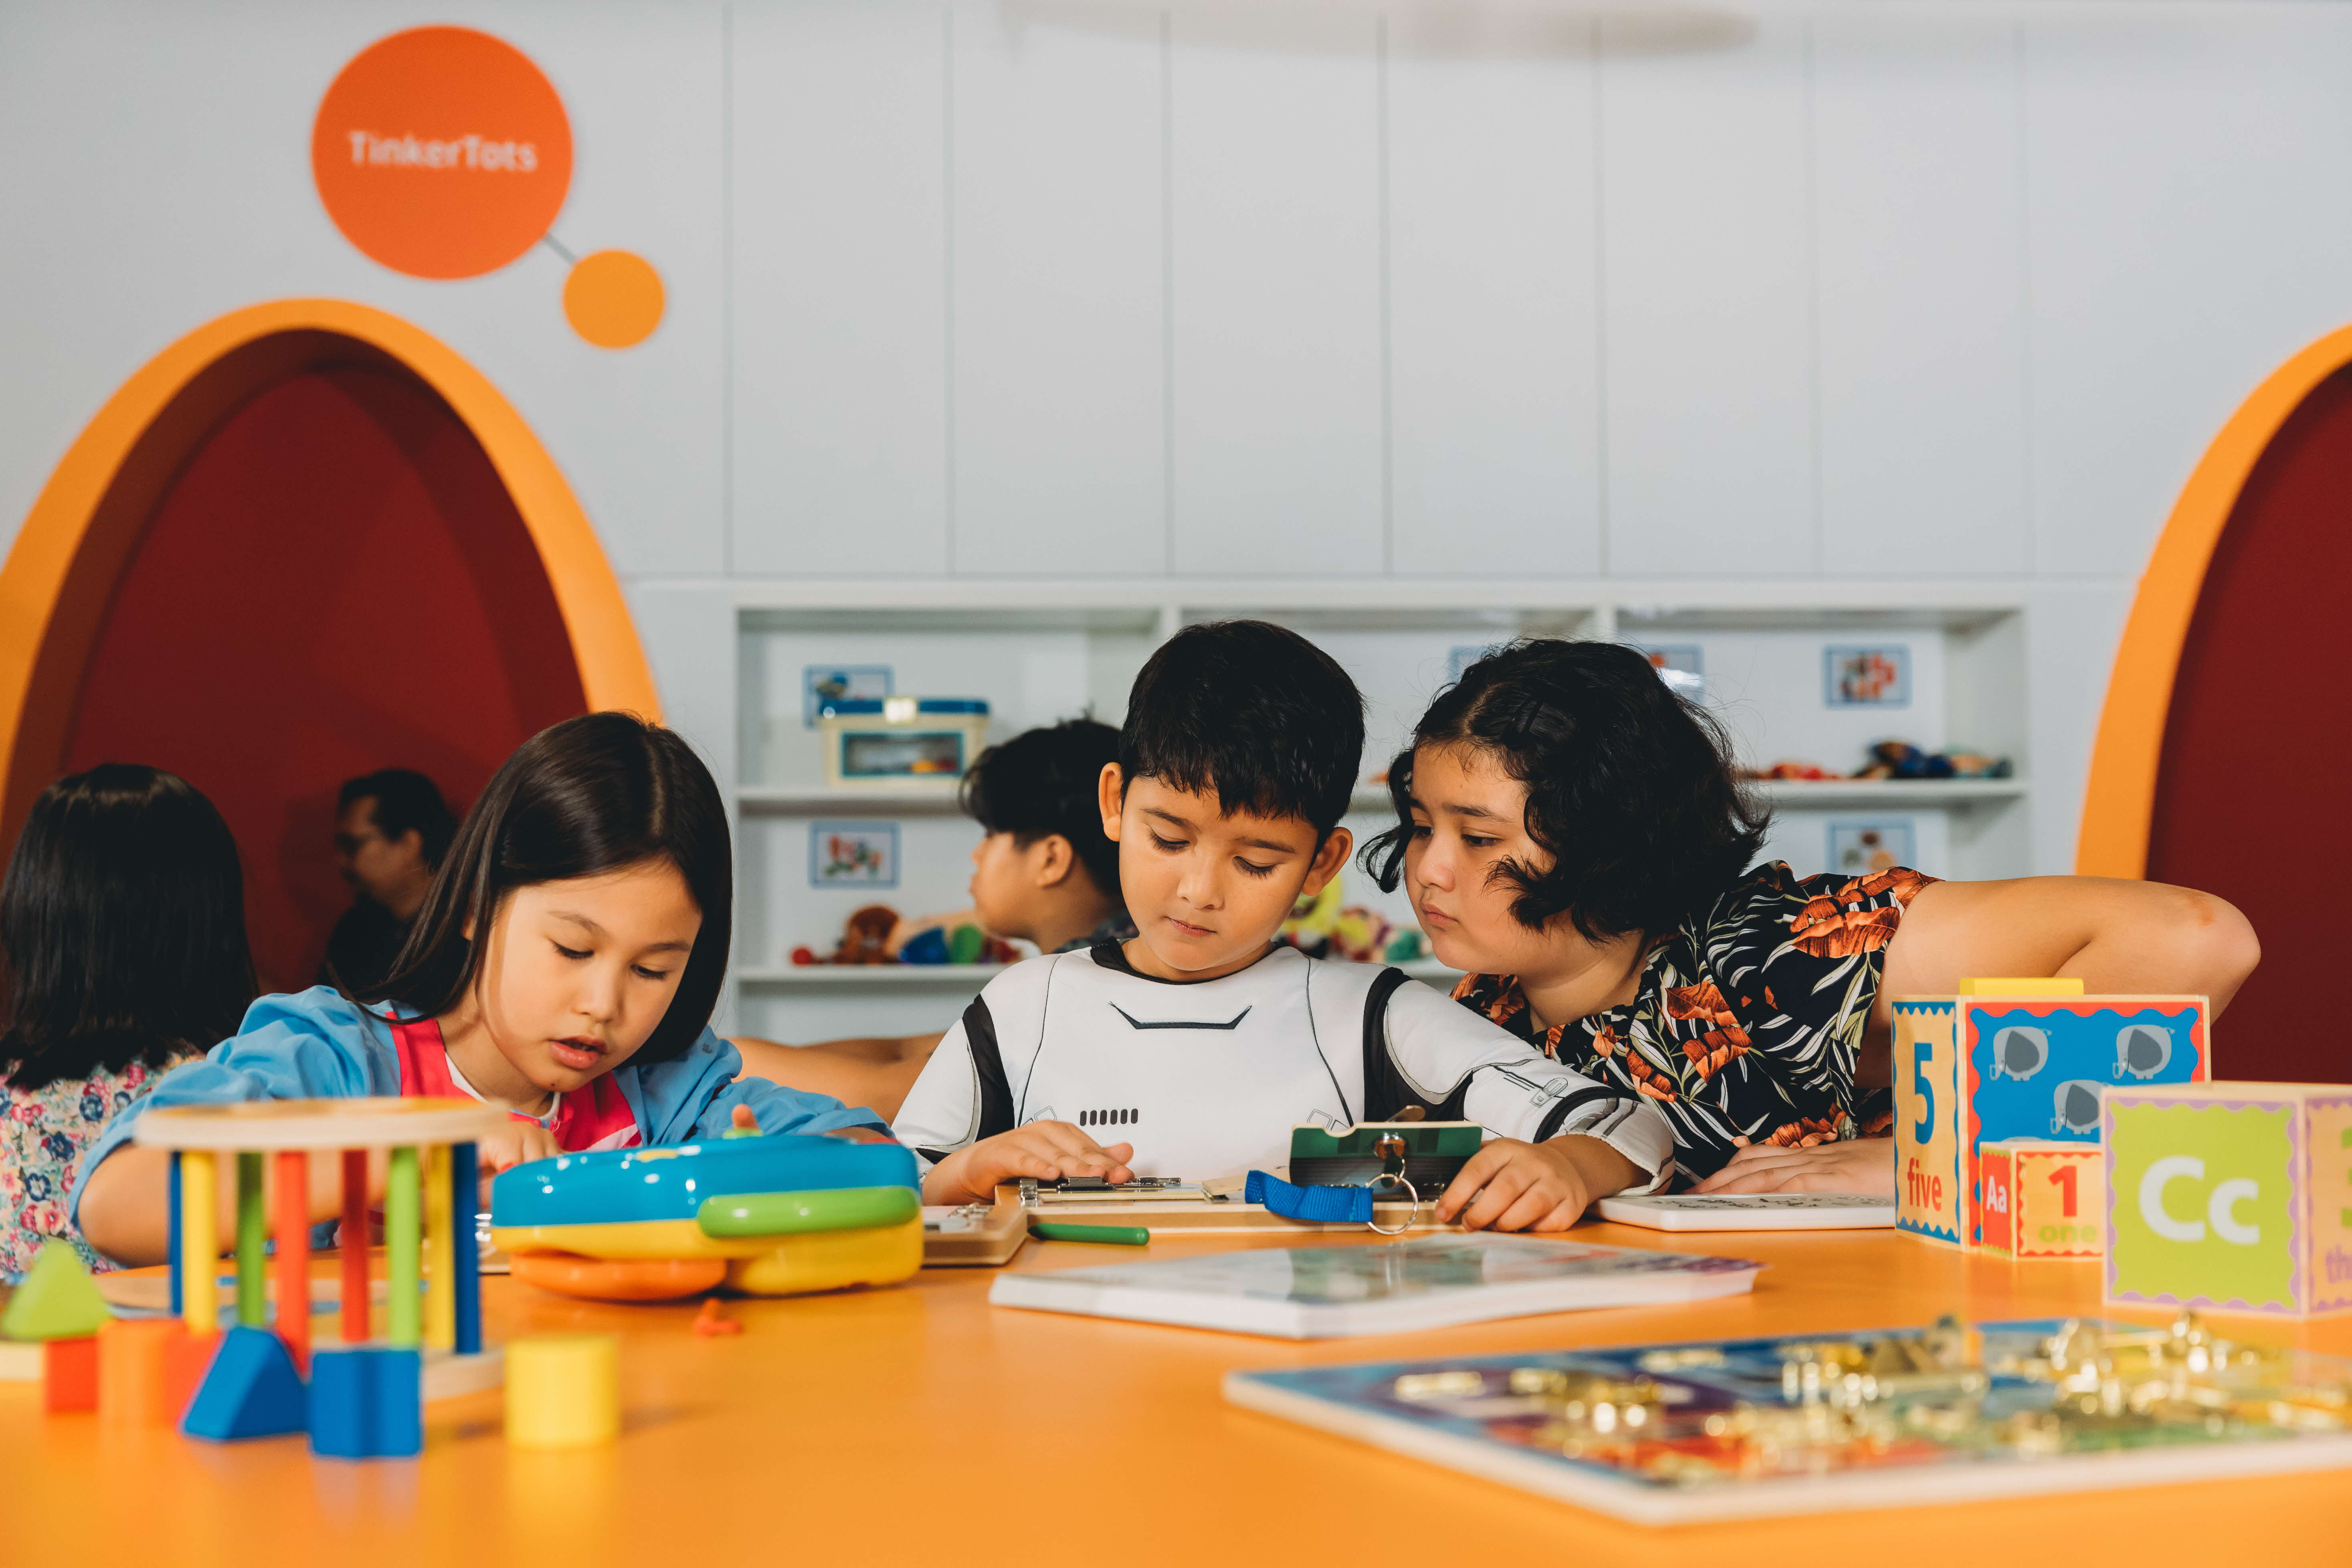 A girl and boy are seated at a table in the Toy Library focused on their building activity while another girl looks on curiously